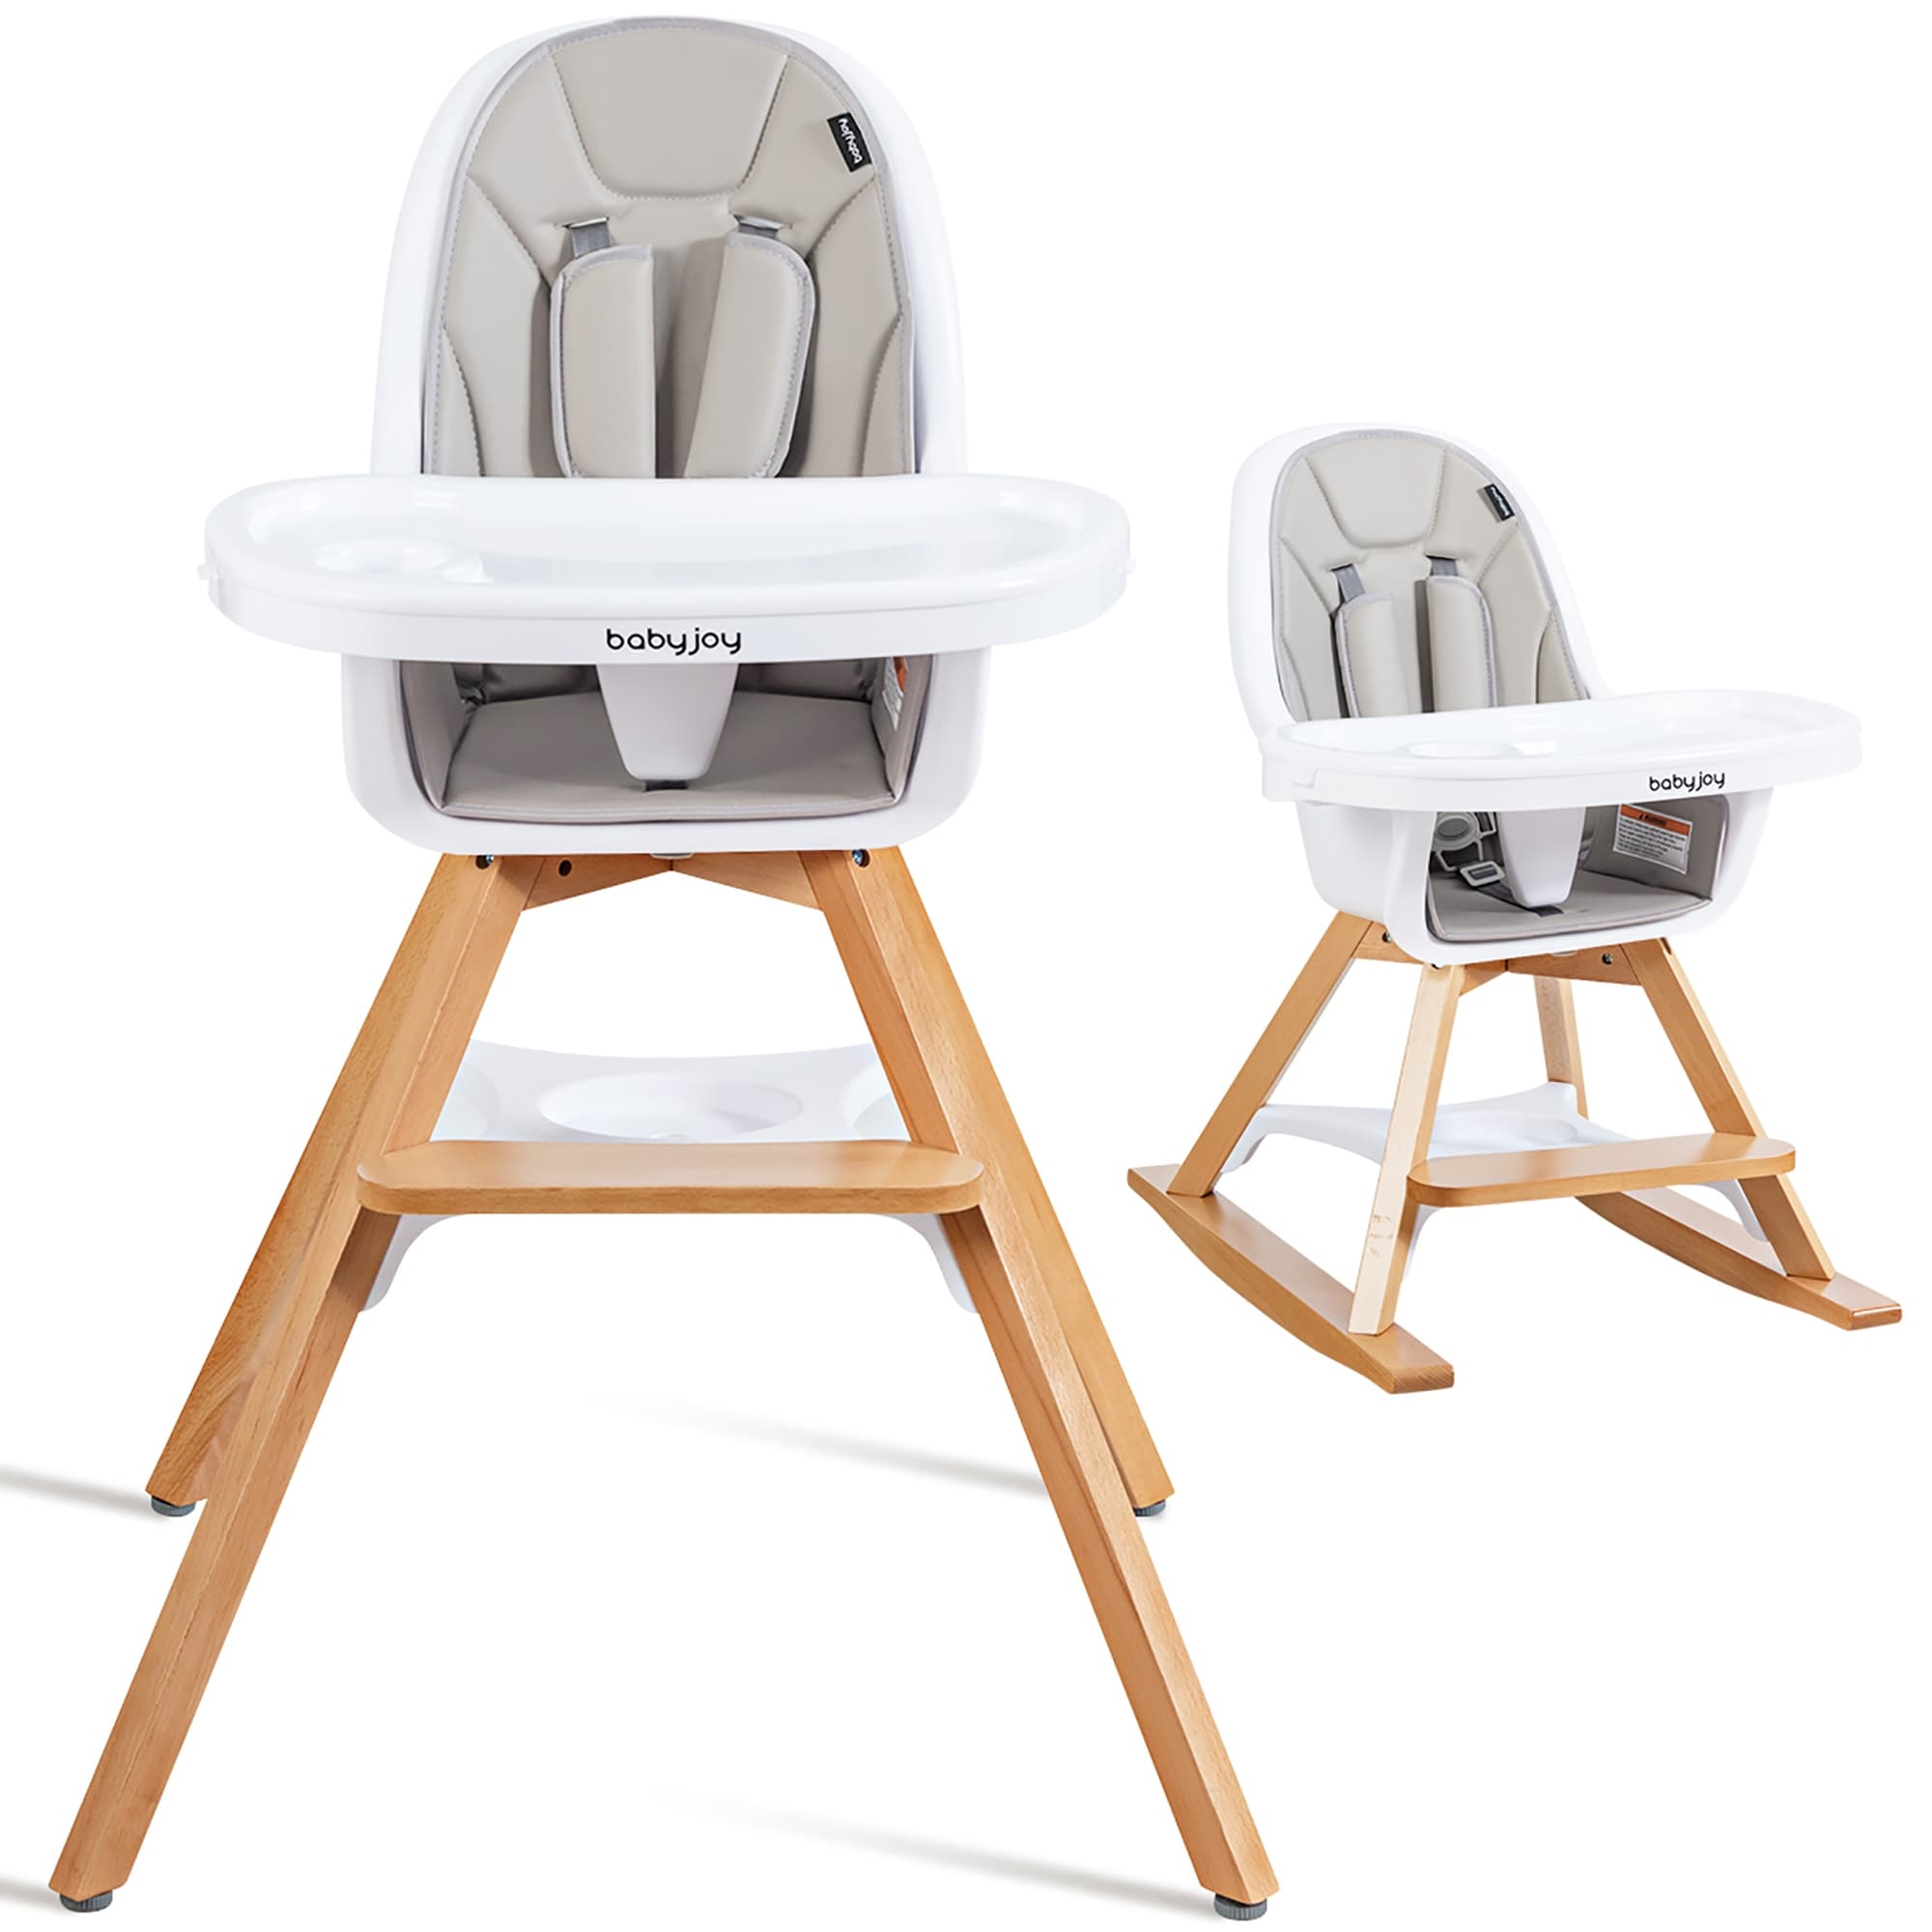 6-in-1 Baby High Chair Infant Activity Center with Height Adjustment -  Costway